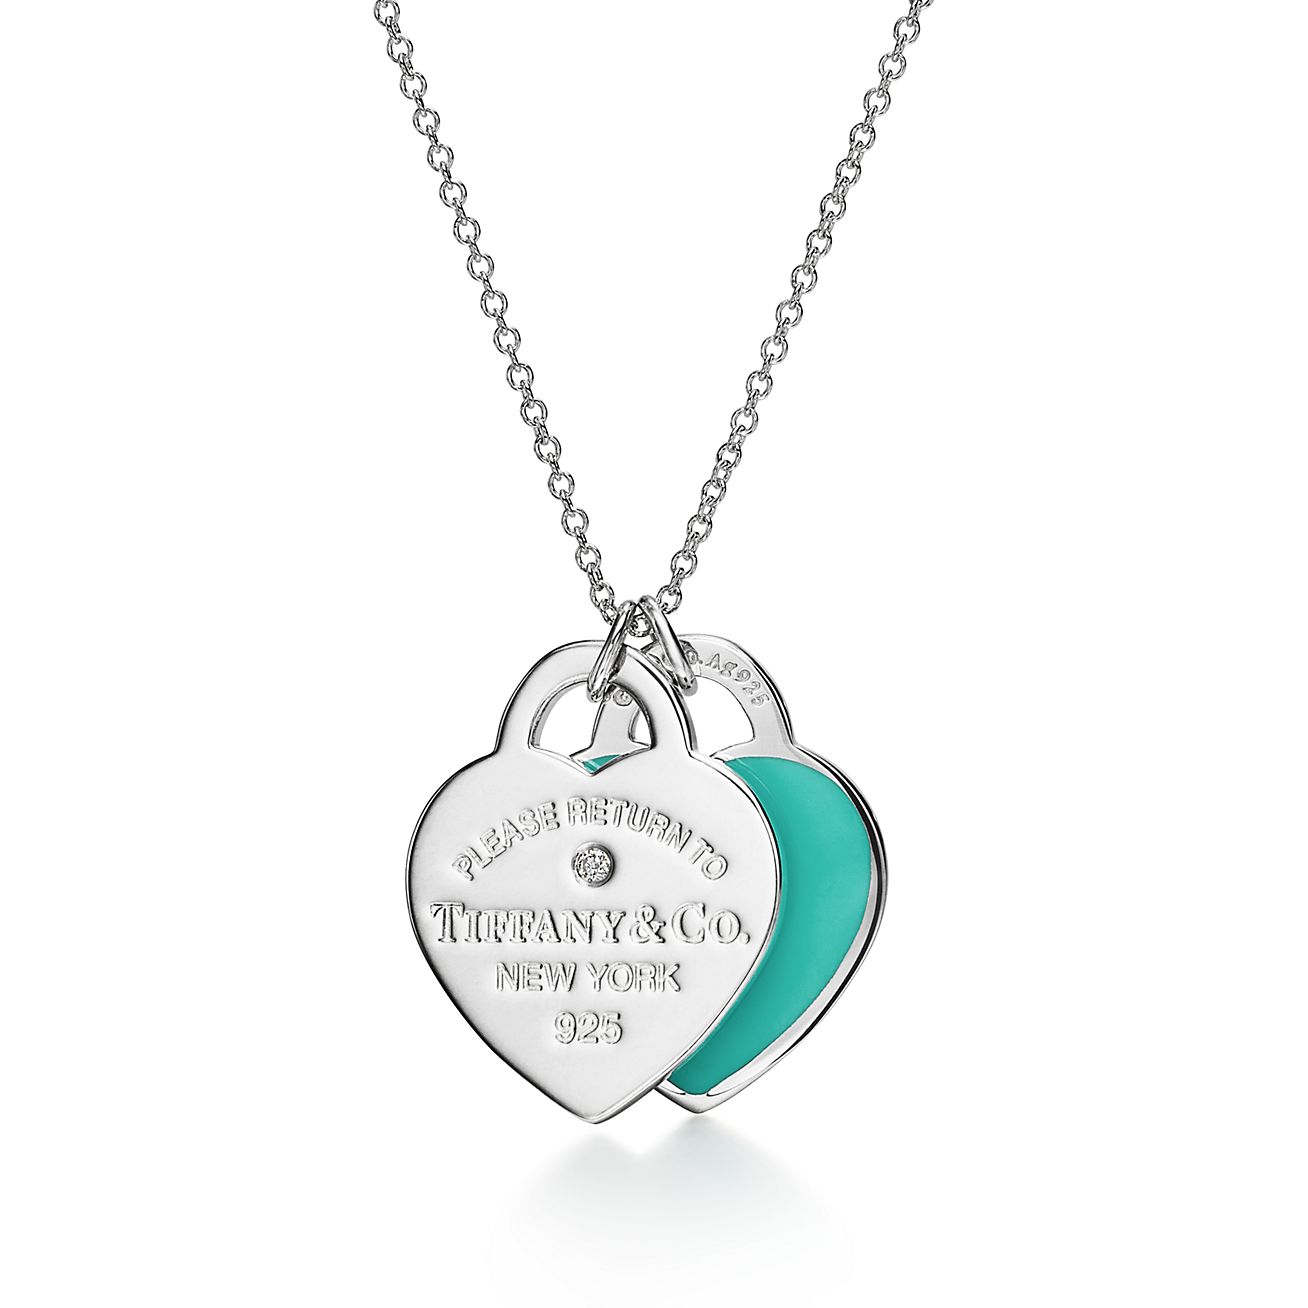 Tiffany & Co. Return To Tiffany Heart Tag Sterling Silver Pendant Necklace  Tiffany & Co.